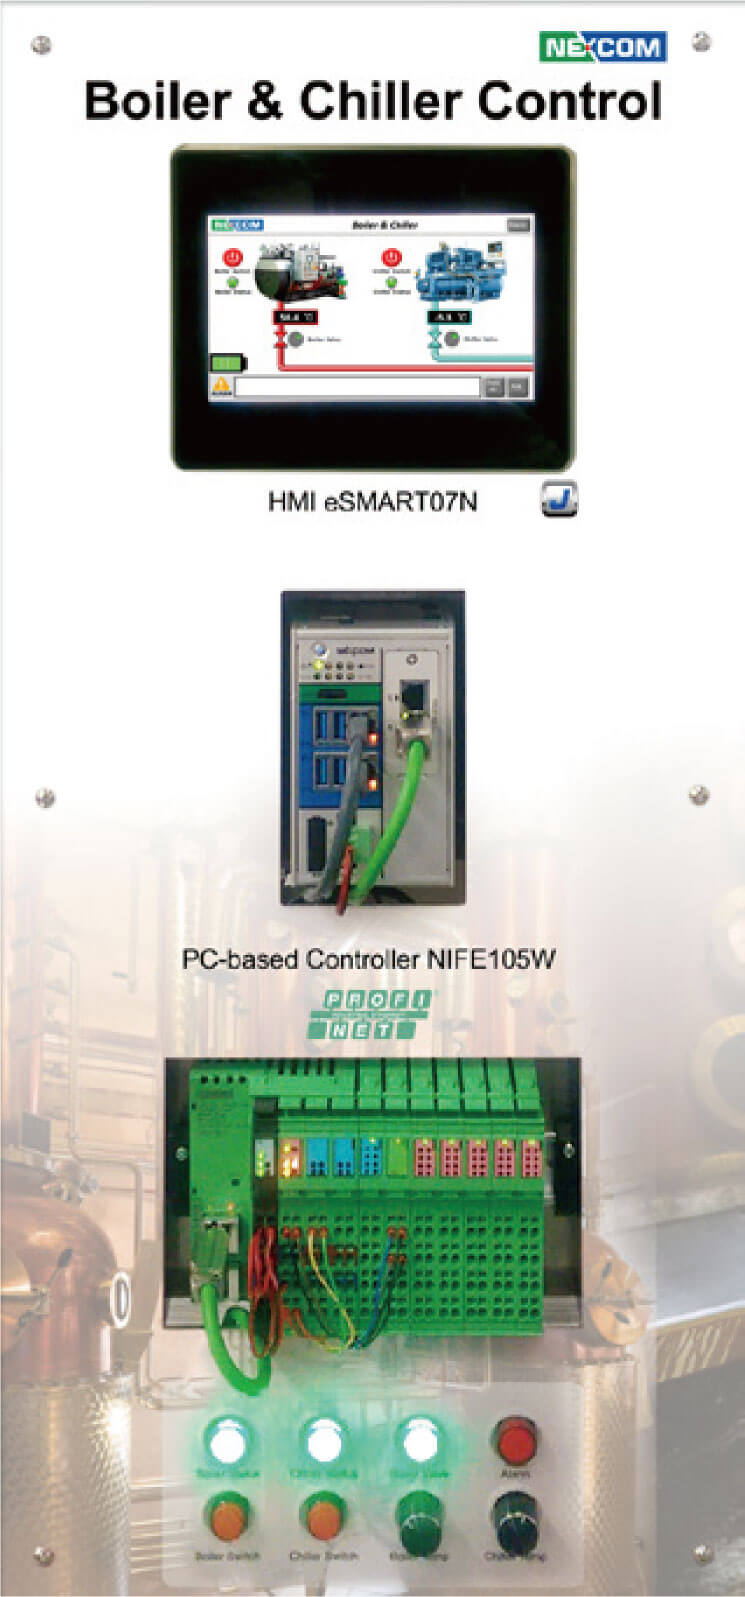 Multi-fieldbus communication PC-based controller with CODESYS RTE HMI with JMobile runtime included Scenario for facility simulation with 4 indicators, 2 push button and 2 knobs